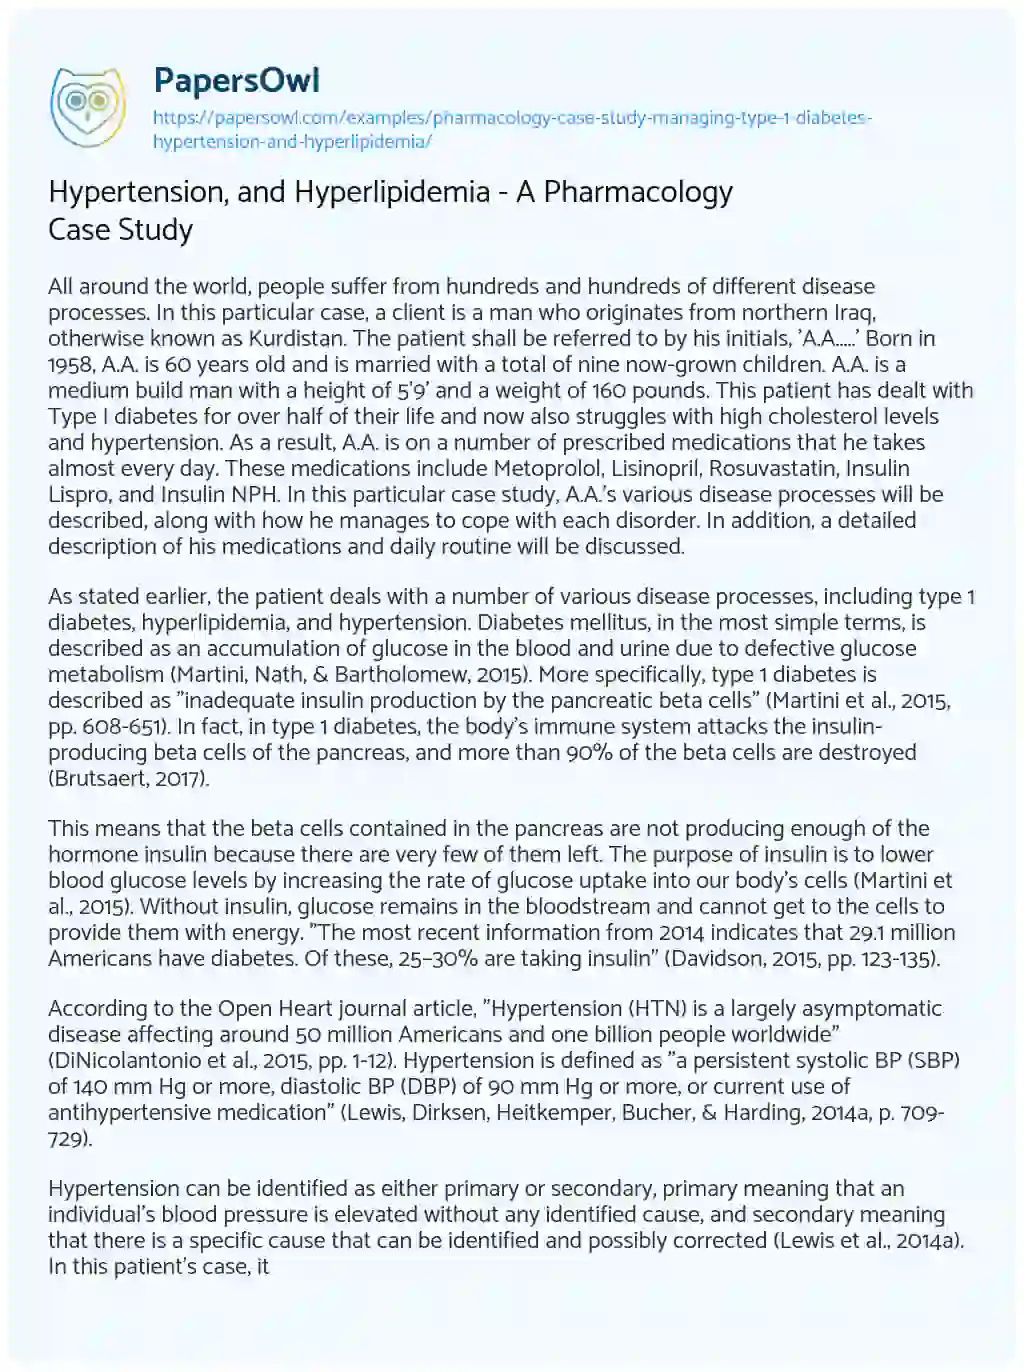 Essay on Hypertension, and Hyperlipidemia – a Pharmacology Case Study